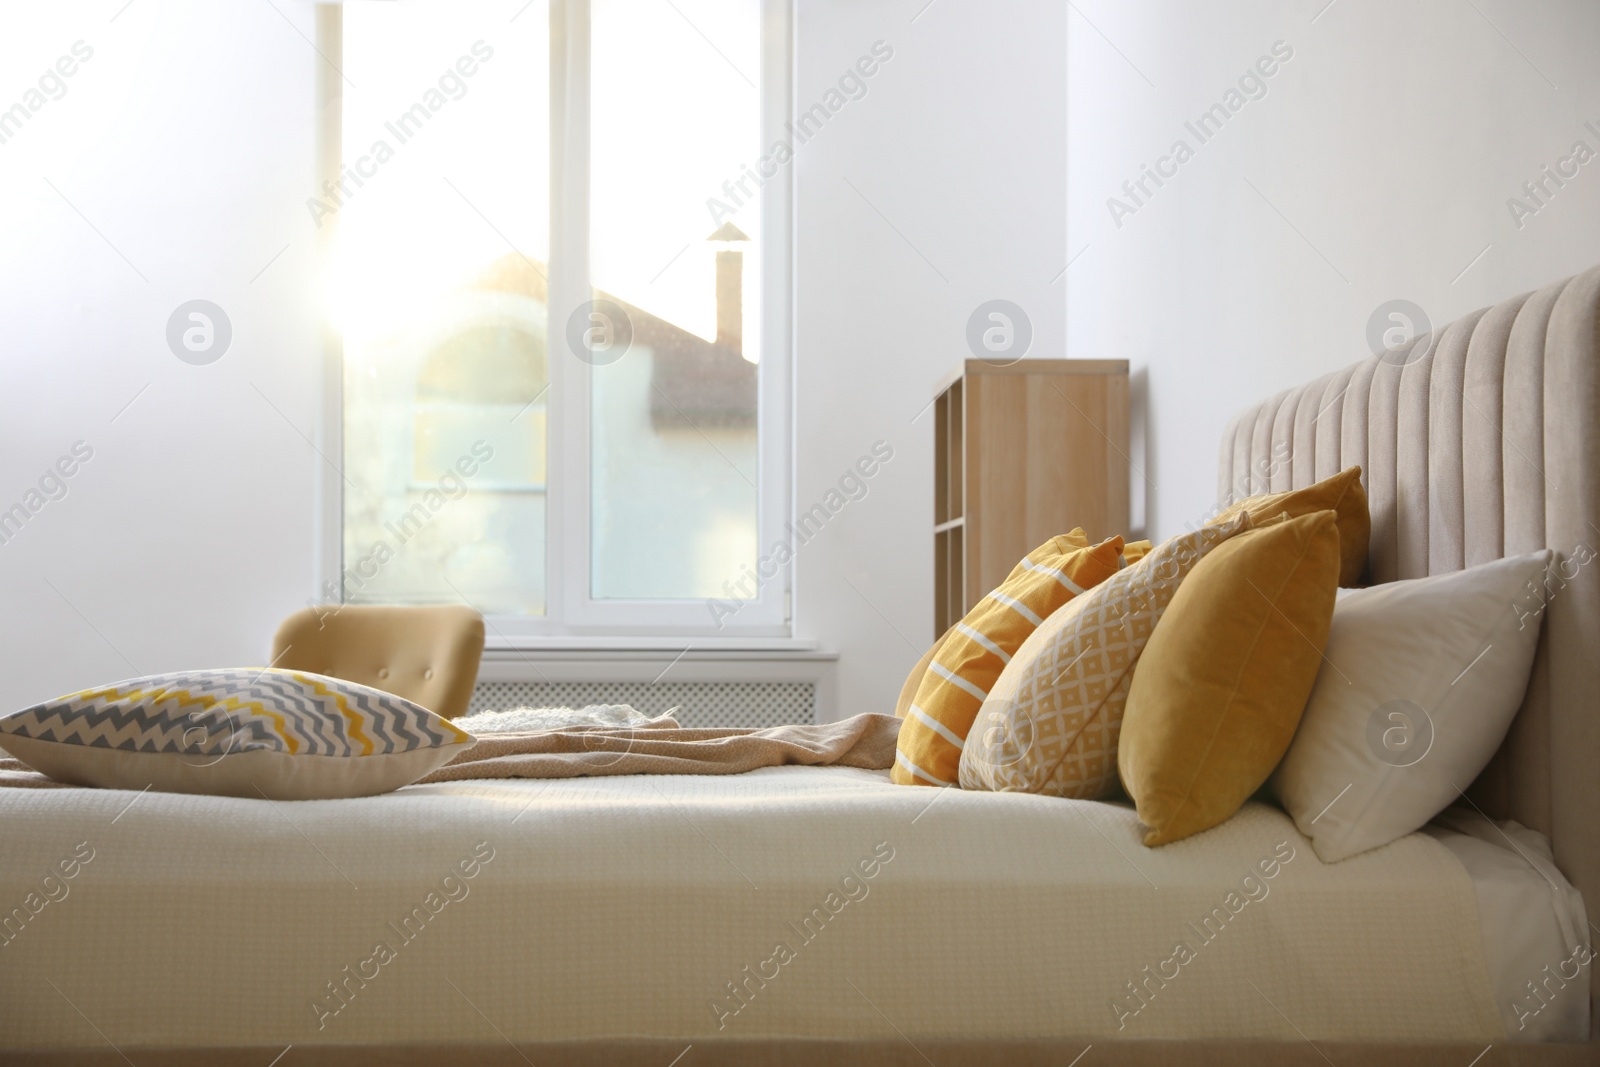 Photo of Comfortable bed with soft pillows in stylish room interior